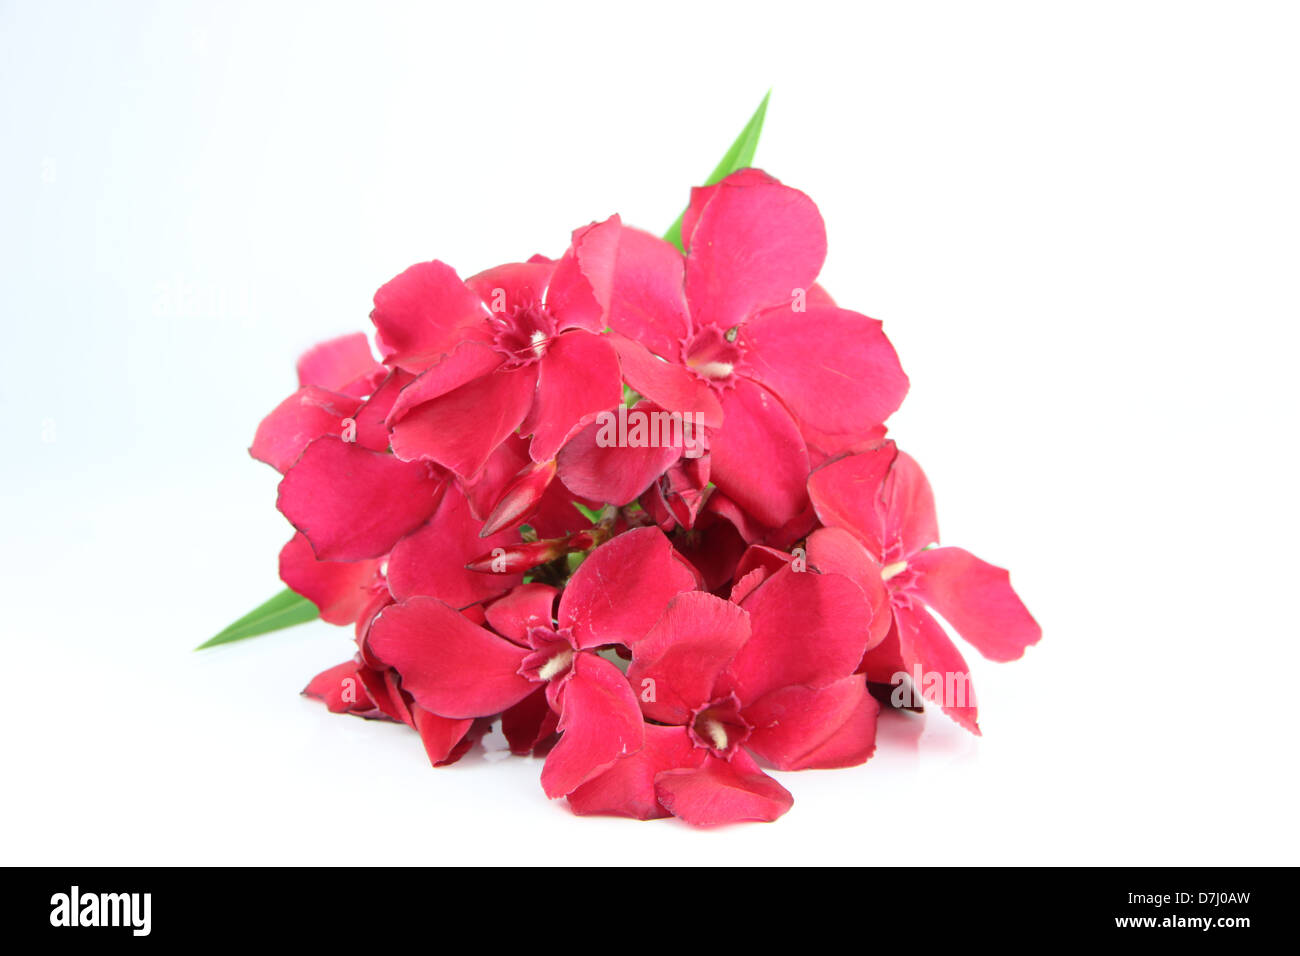 Bouquet of red flowers on a white background. Stock Photo